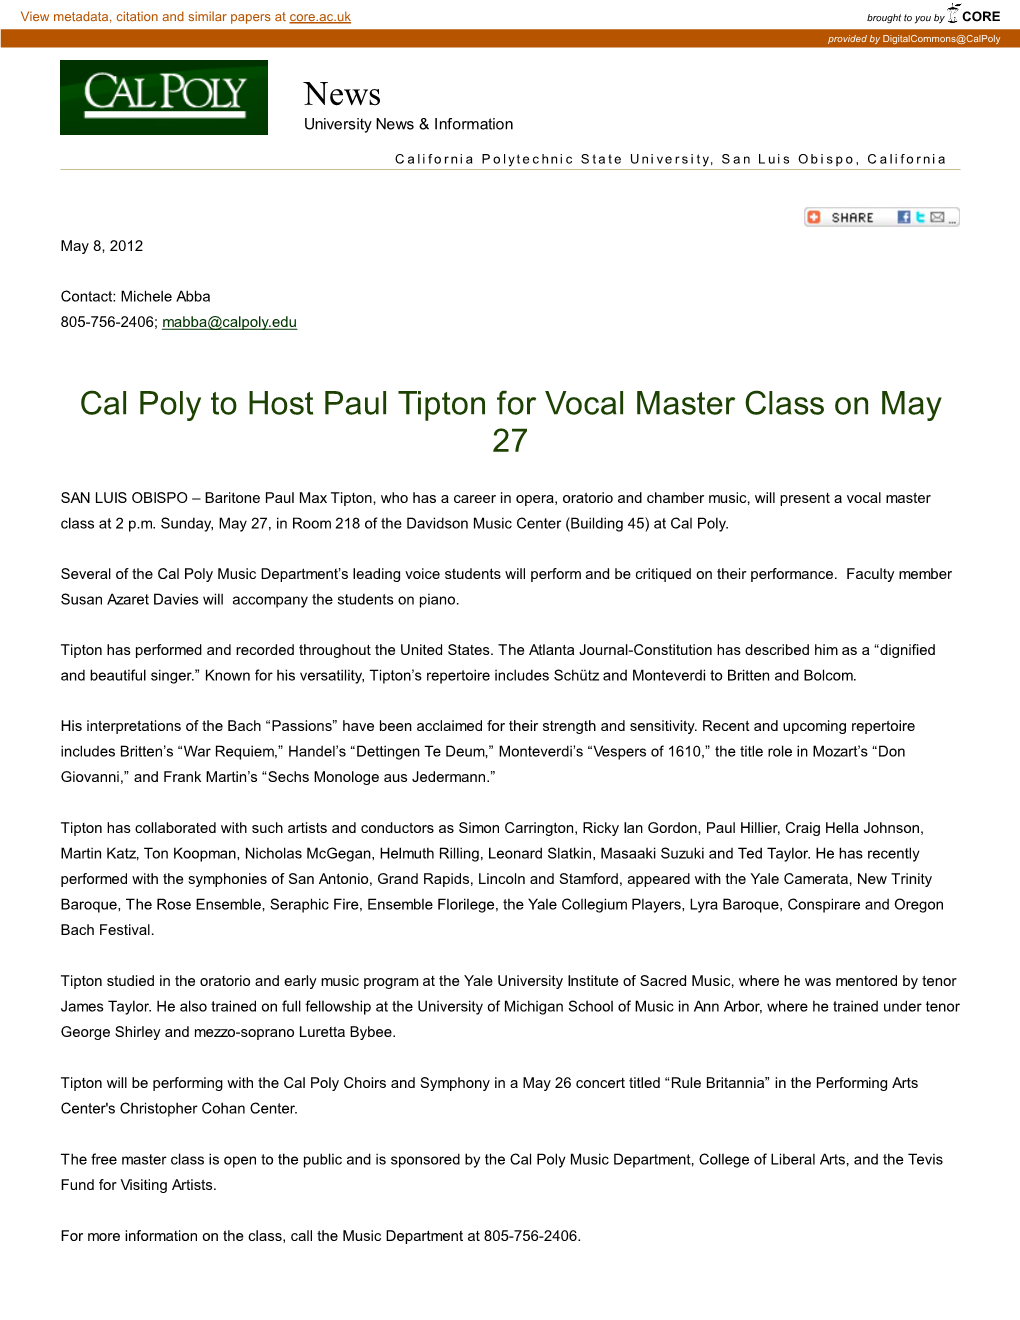 Cal Poly to Host Paul Tipton for Vocal Master Class on May 27